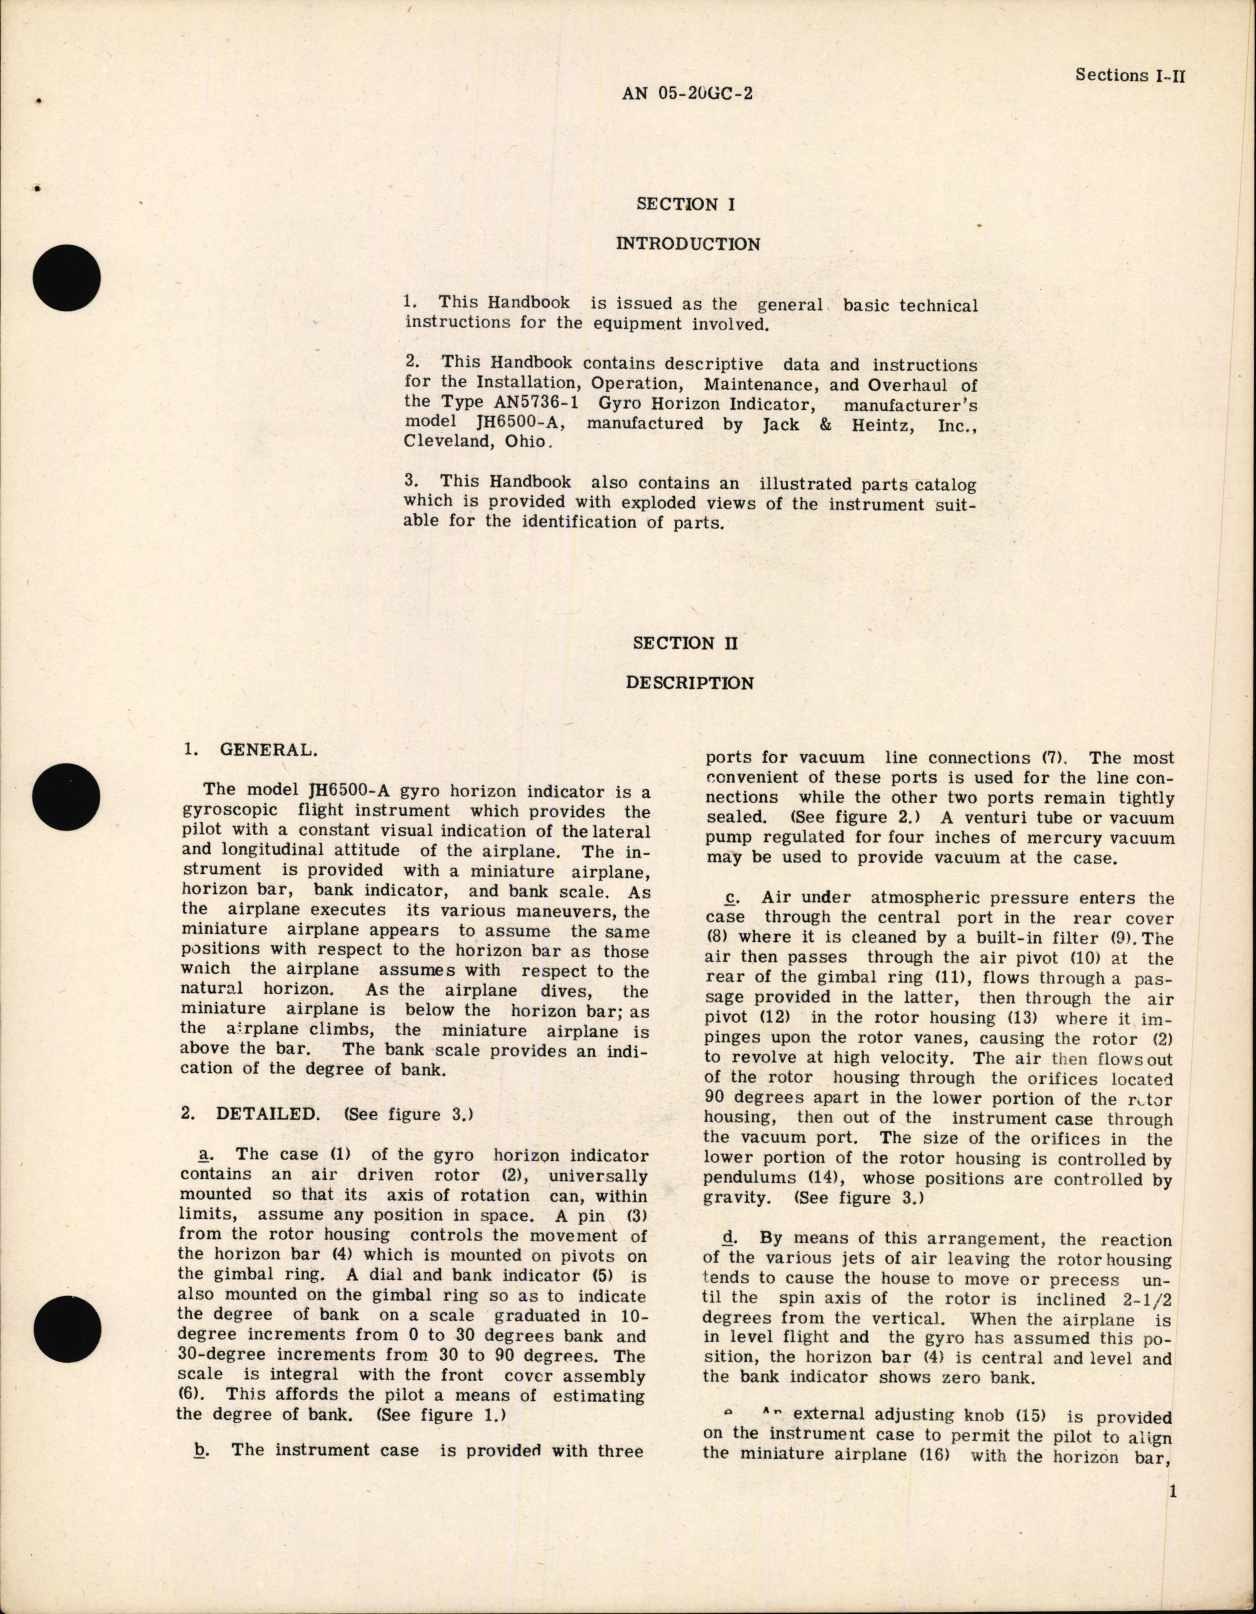 Sample page 5 from AirCorps Library document: Operation, Service, & Overhaul Instructions with Parts Catalog for Type AN 5736-1 F.S.S.C. 88-I-1350 Gyro Horizon Indicator